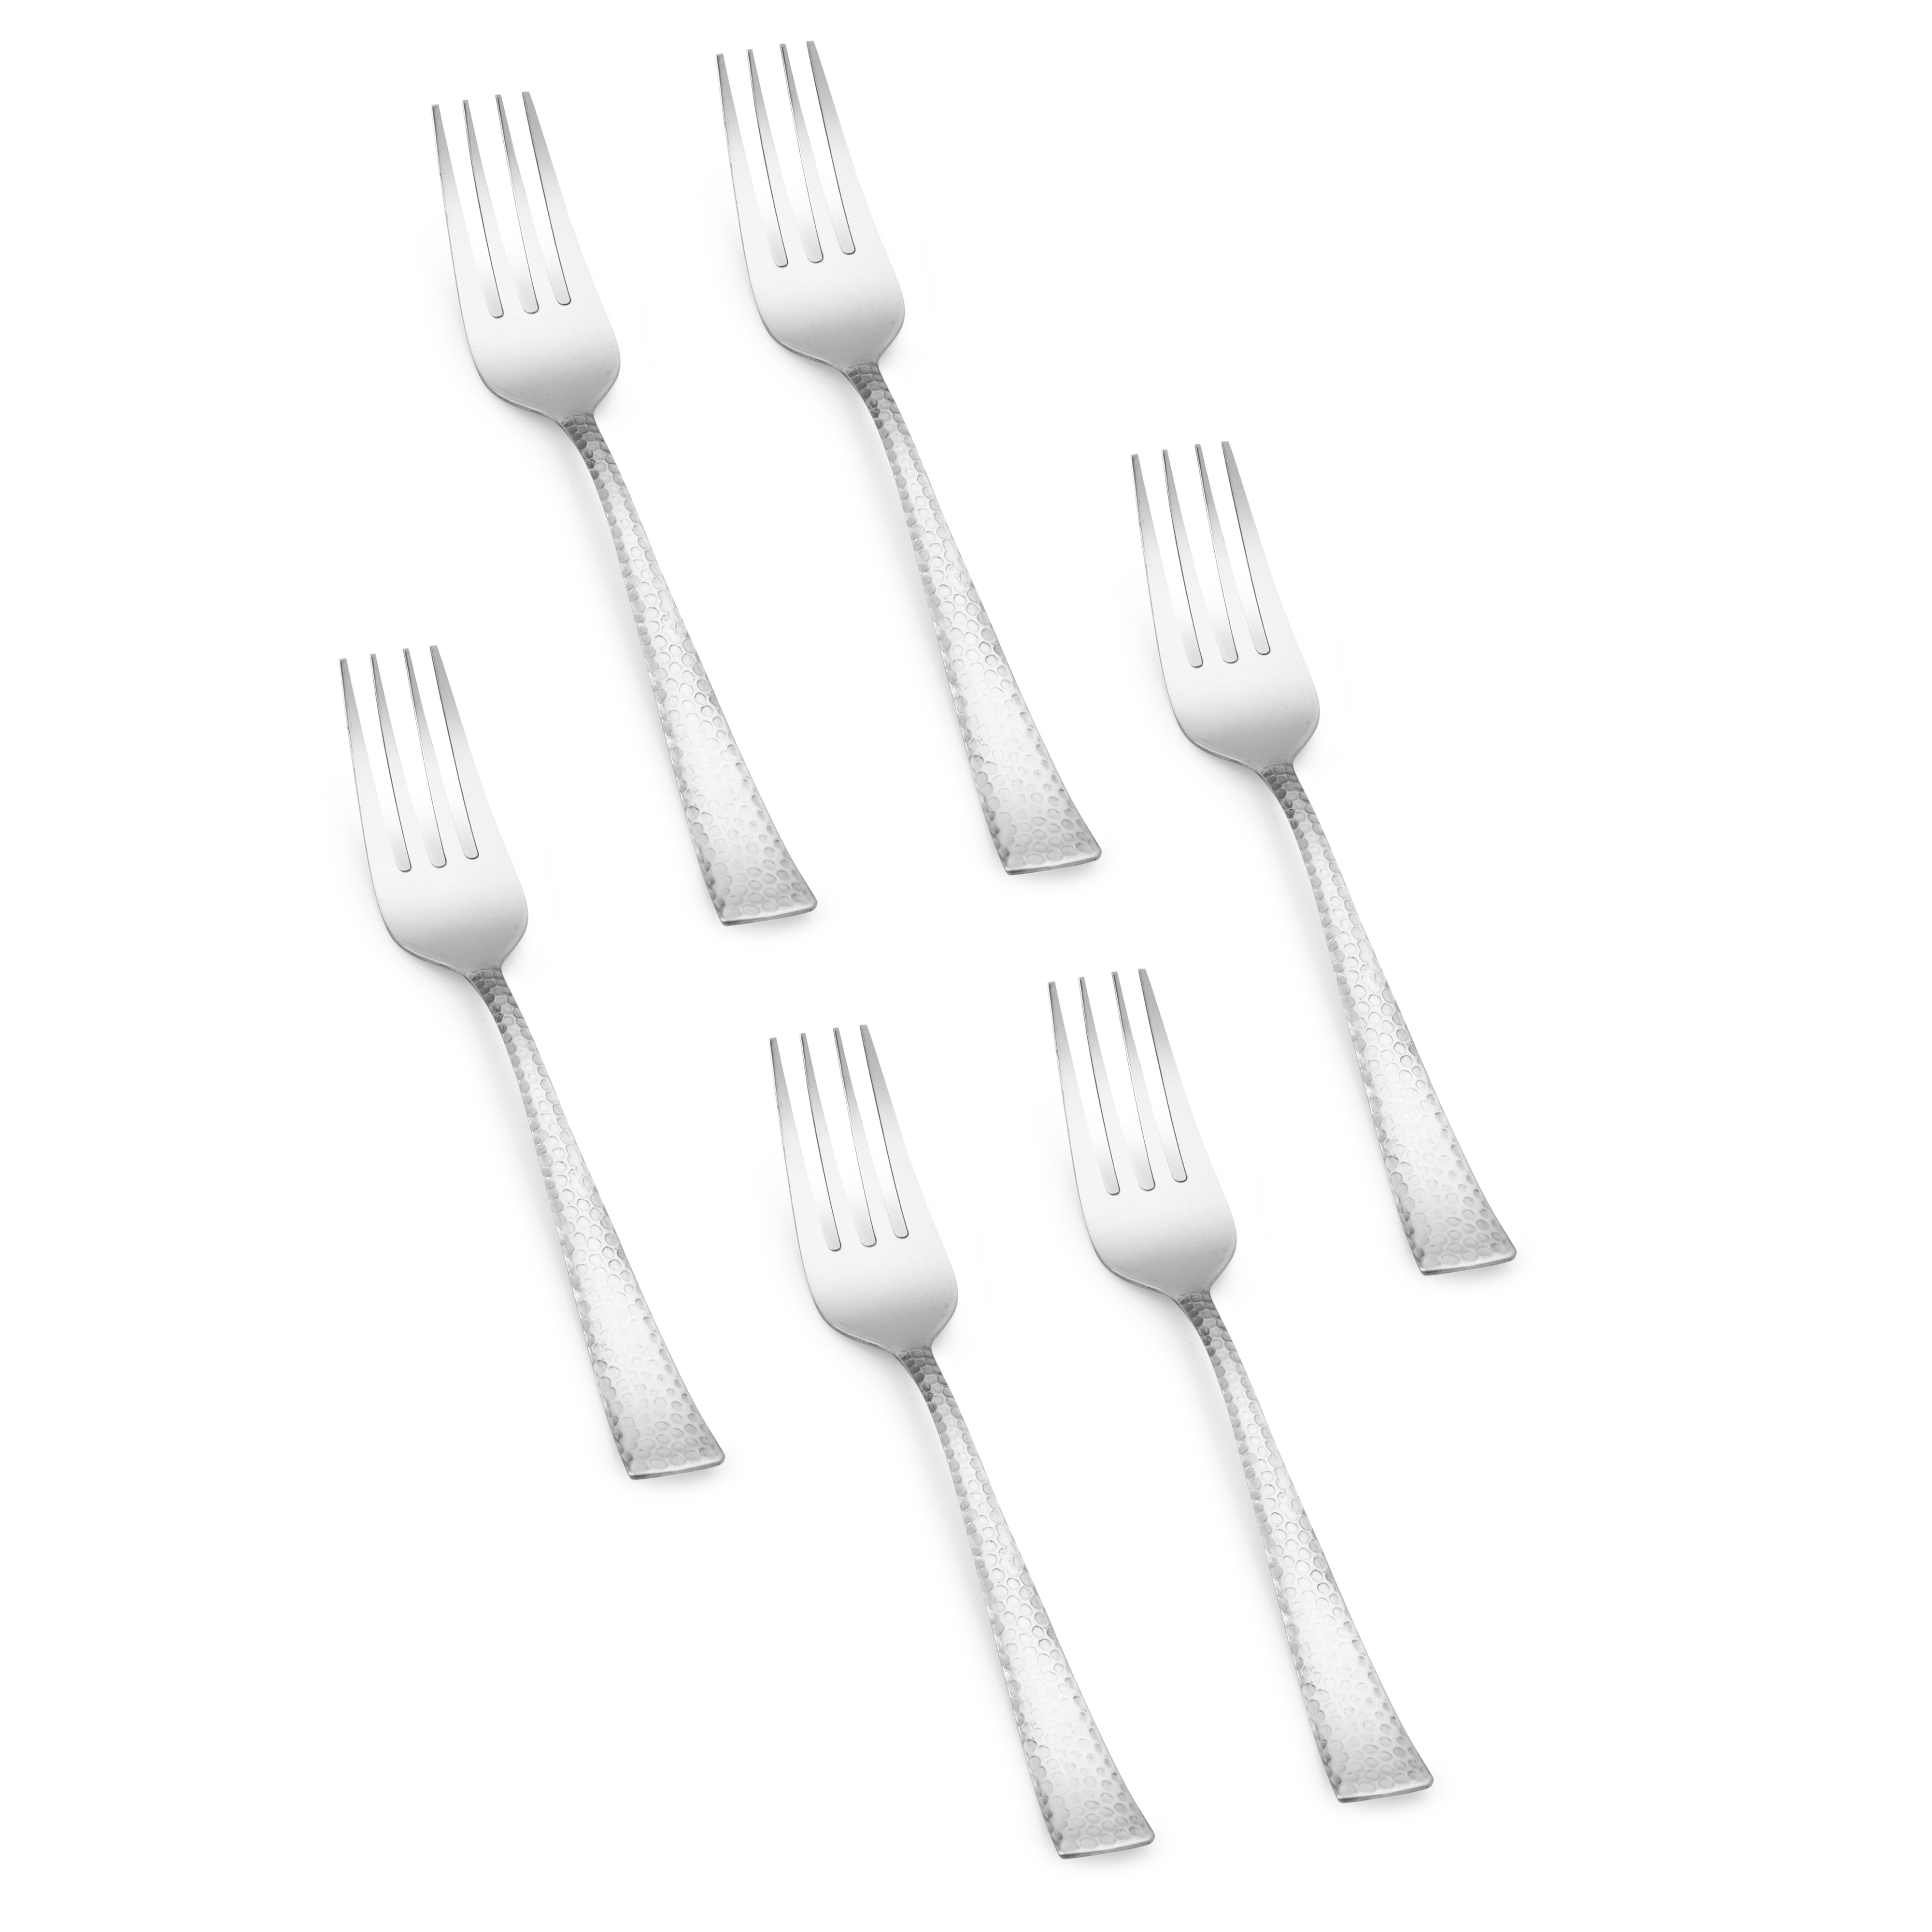 Arias by Lara Dutta Vintage Cutlery Set of 24 With Stand (Silver)